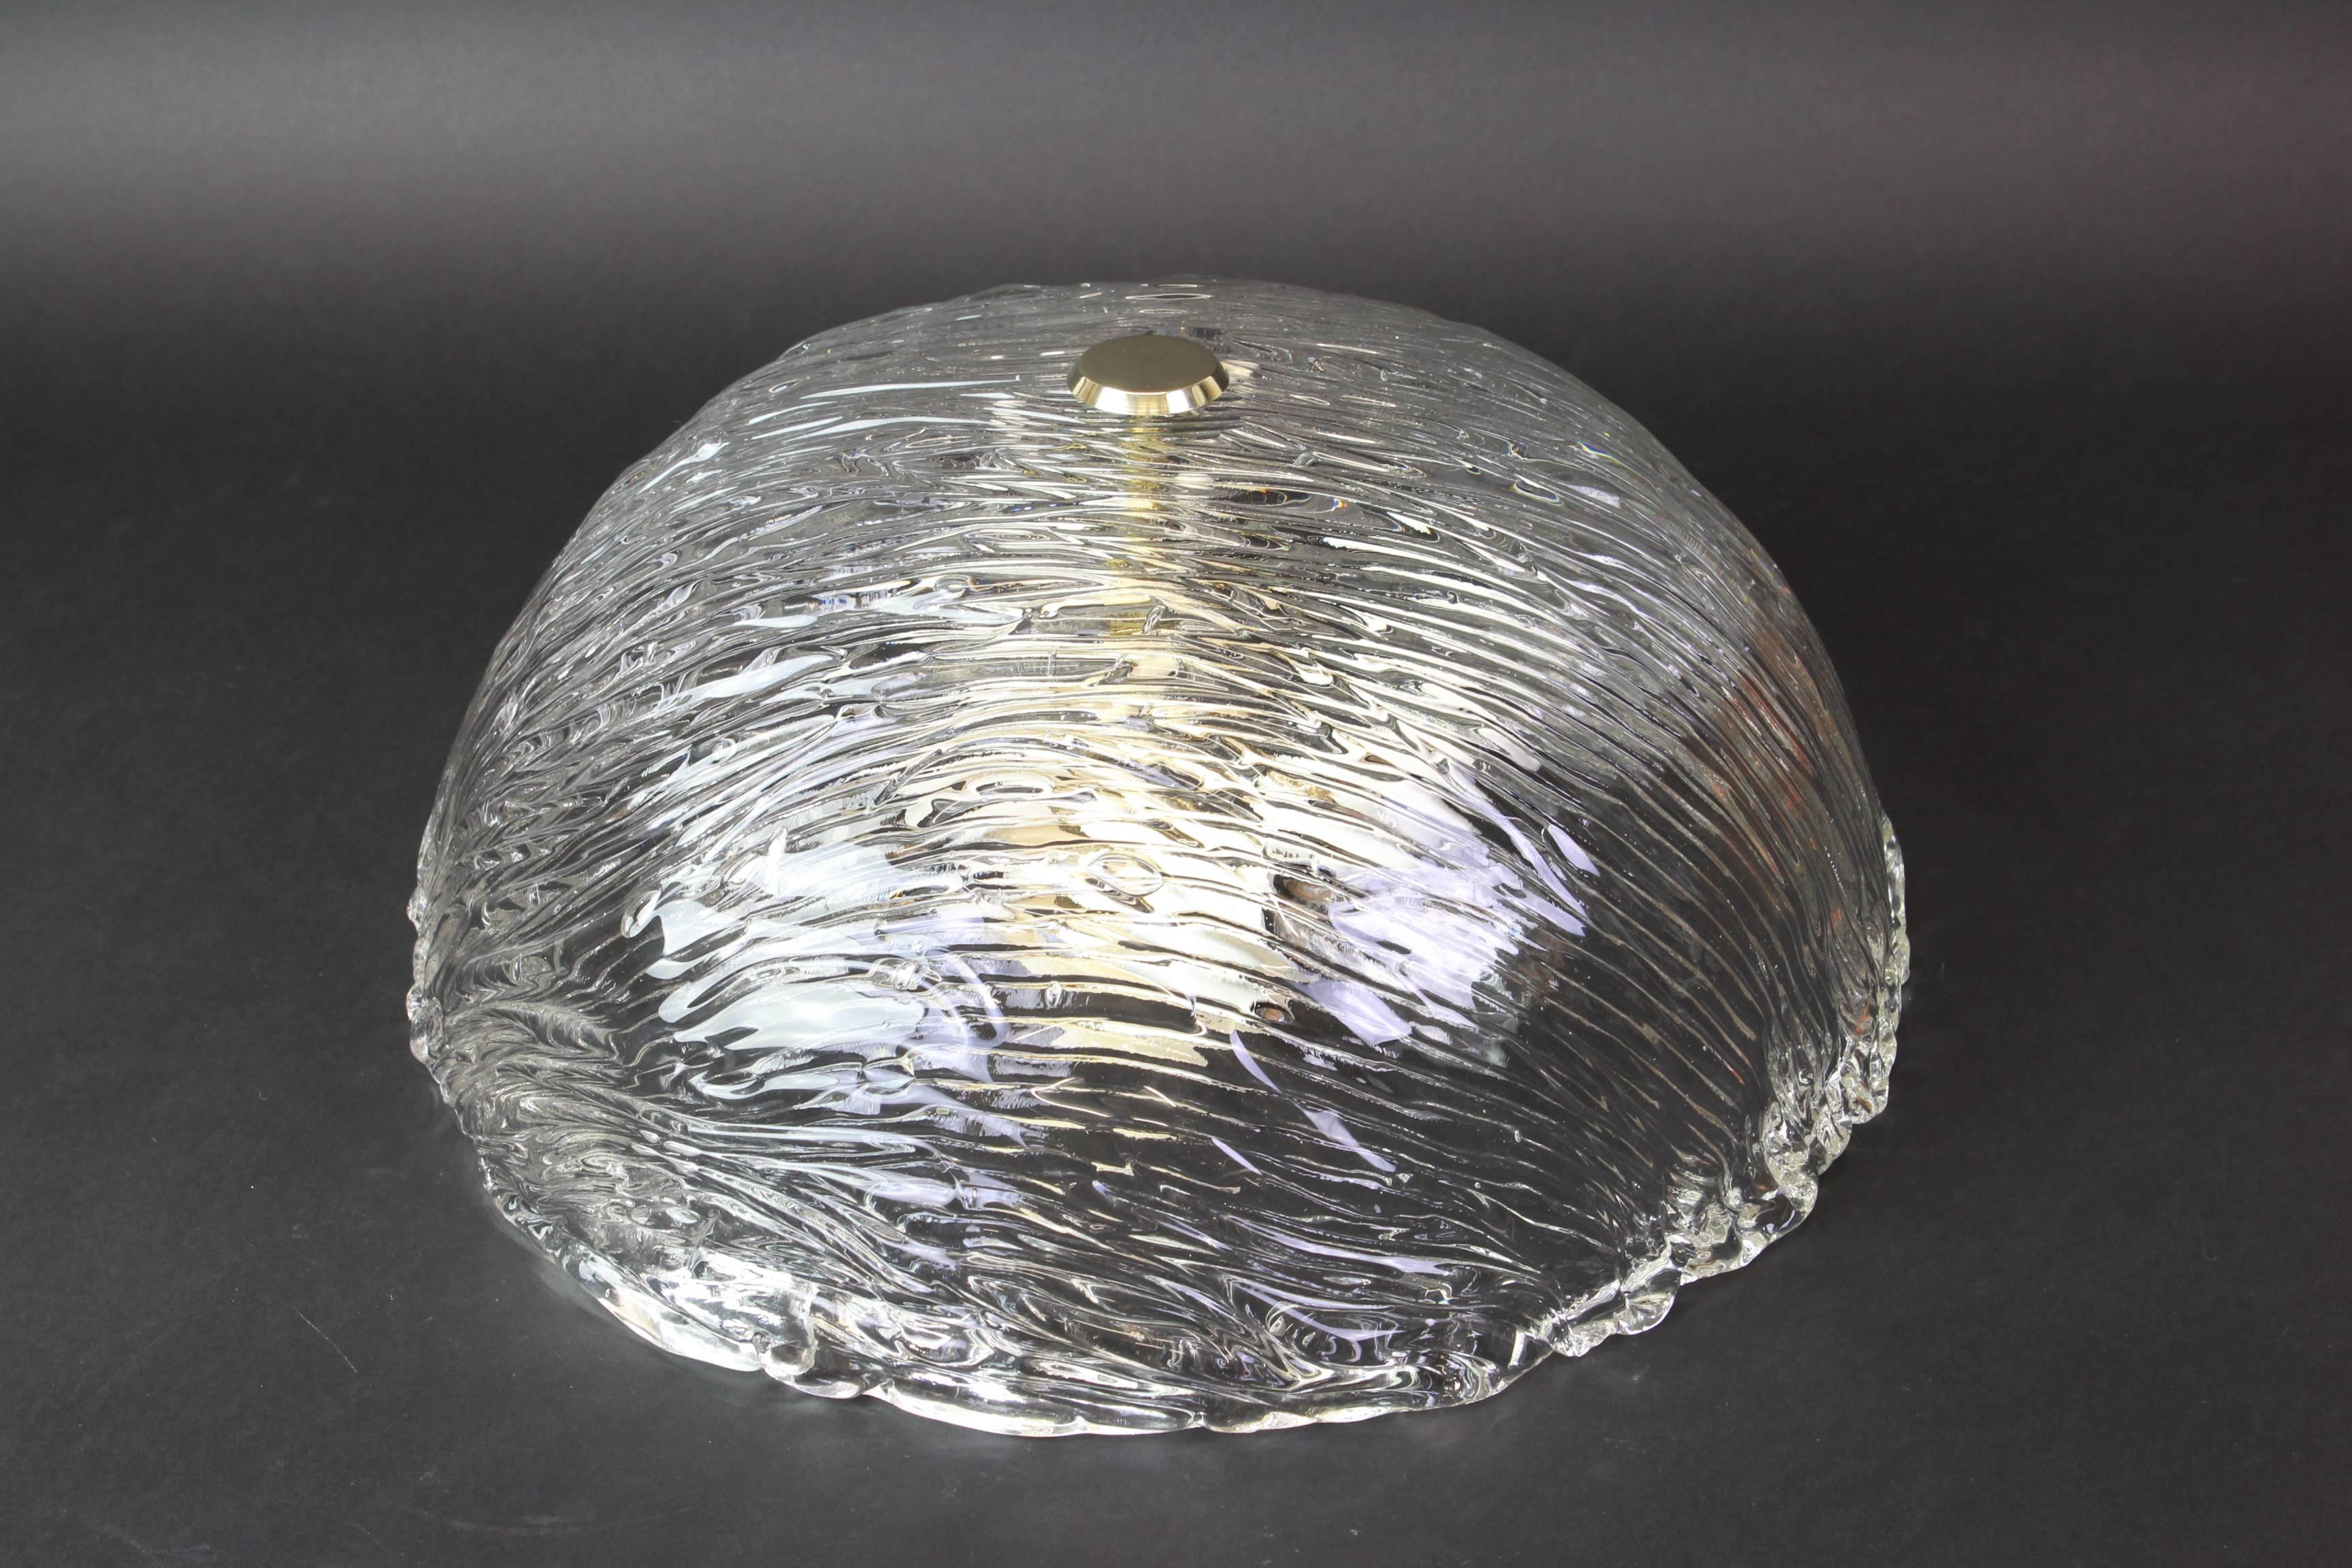 Venini ceiling lights attributed to Carlo Scarpa for Venini, 1950s.
Wonderful light effect.
The heavily textured and slightly iridescent glass dome is held in place by brass knob

High quality and in very good condition. Cleaned, well-wired and